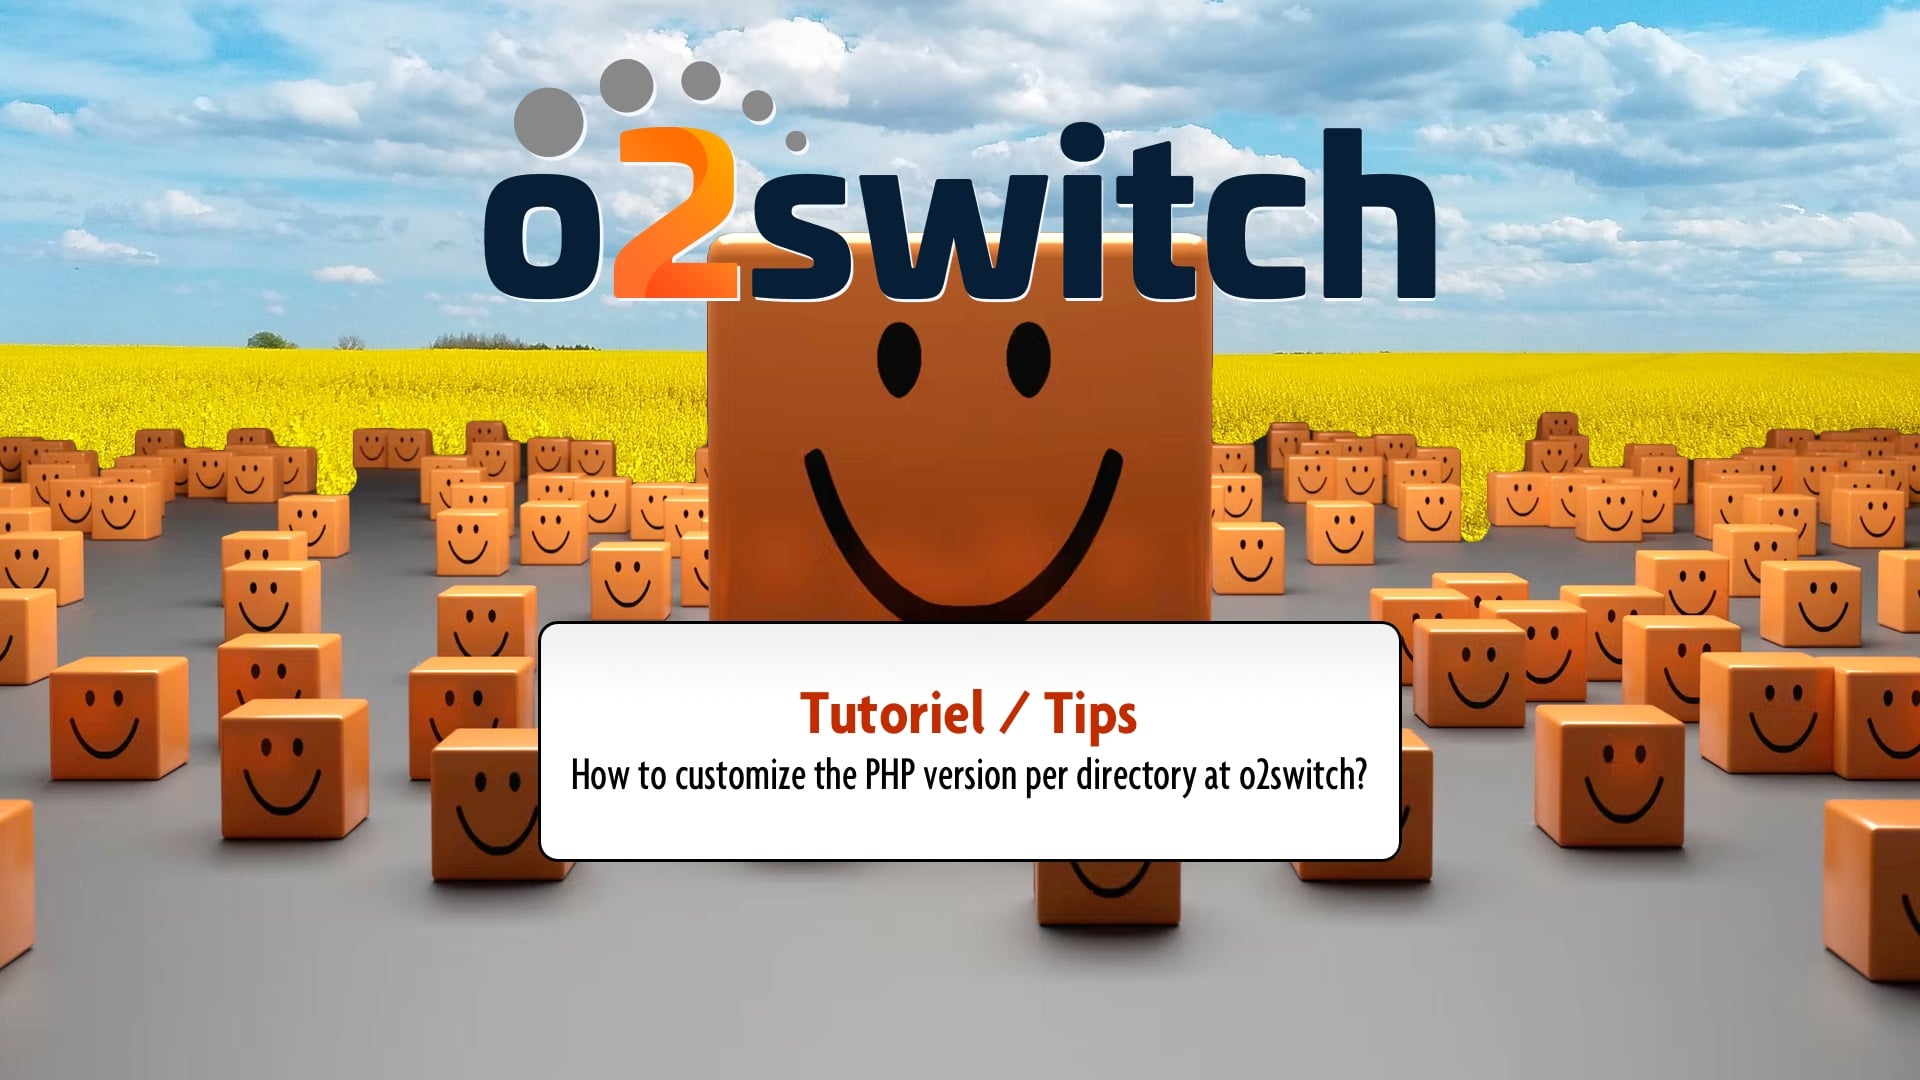 Force the PHP version you want into a directory at o2switch